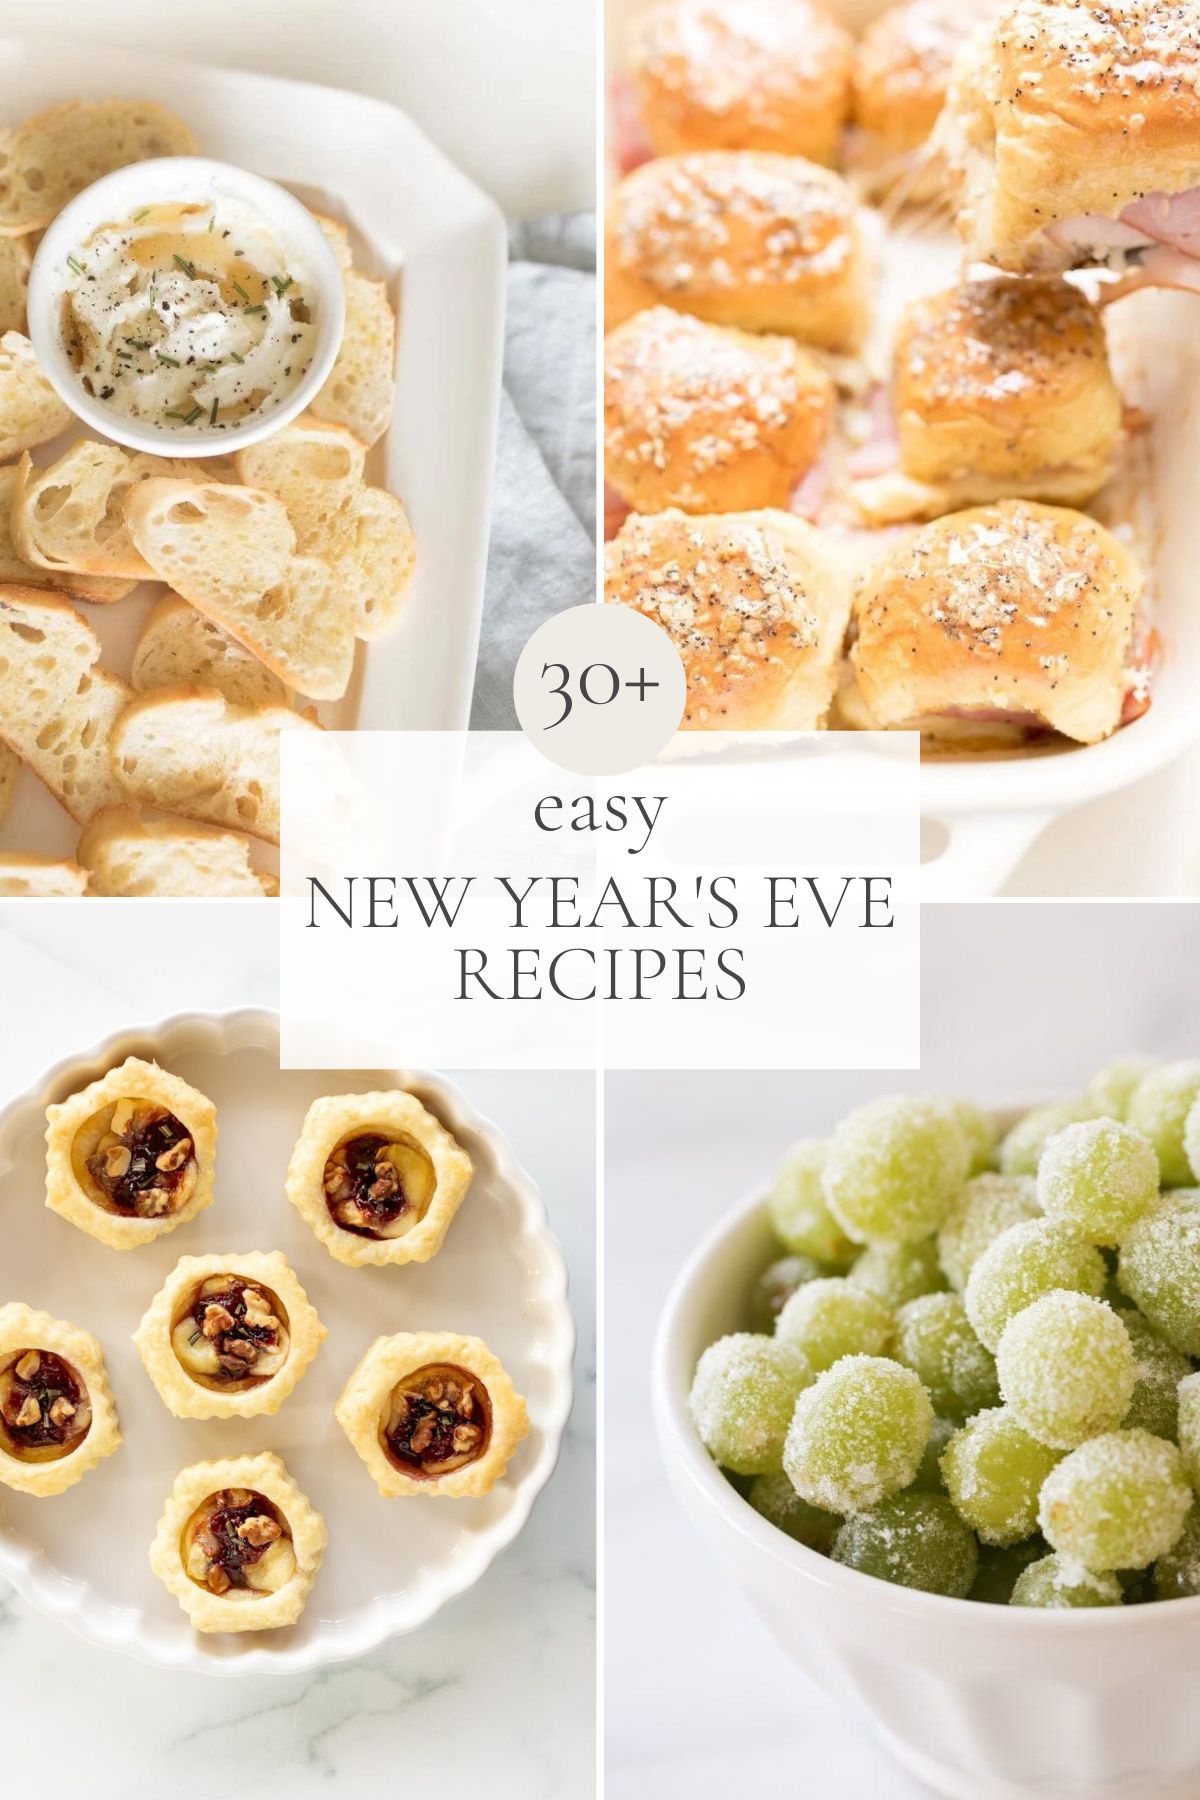 a graphic featuring a variety of recipe images, headline reads "30+ easy new year's eve recipes"